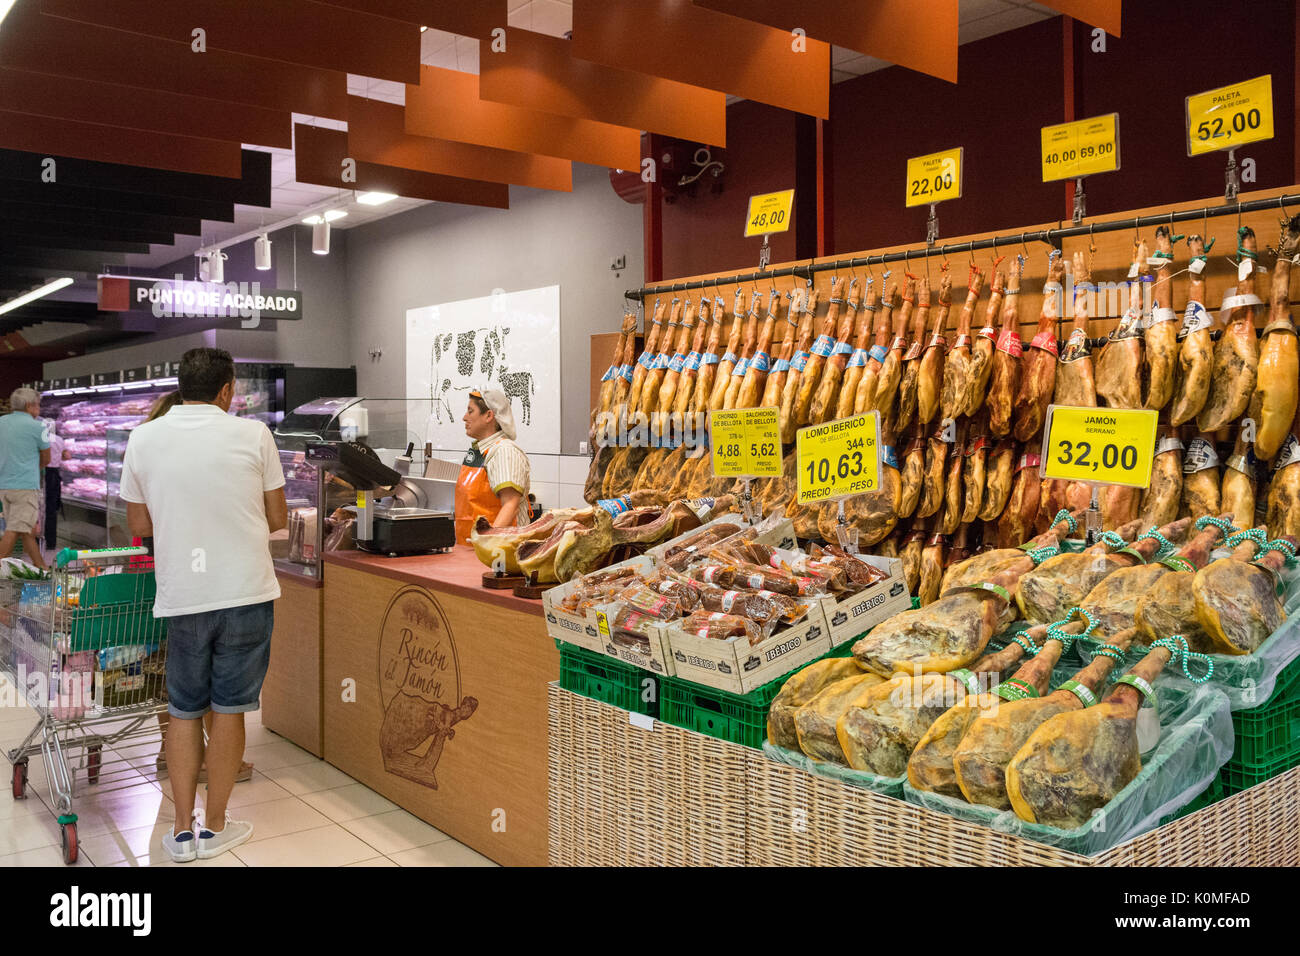 jamon - dry cured ham legs - at typical Spanish supermarket Stock Photo